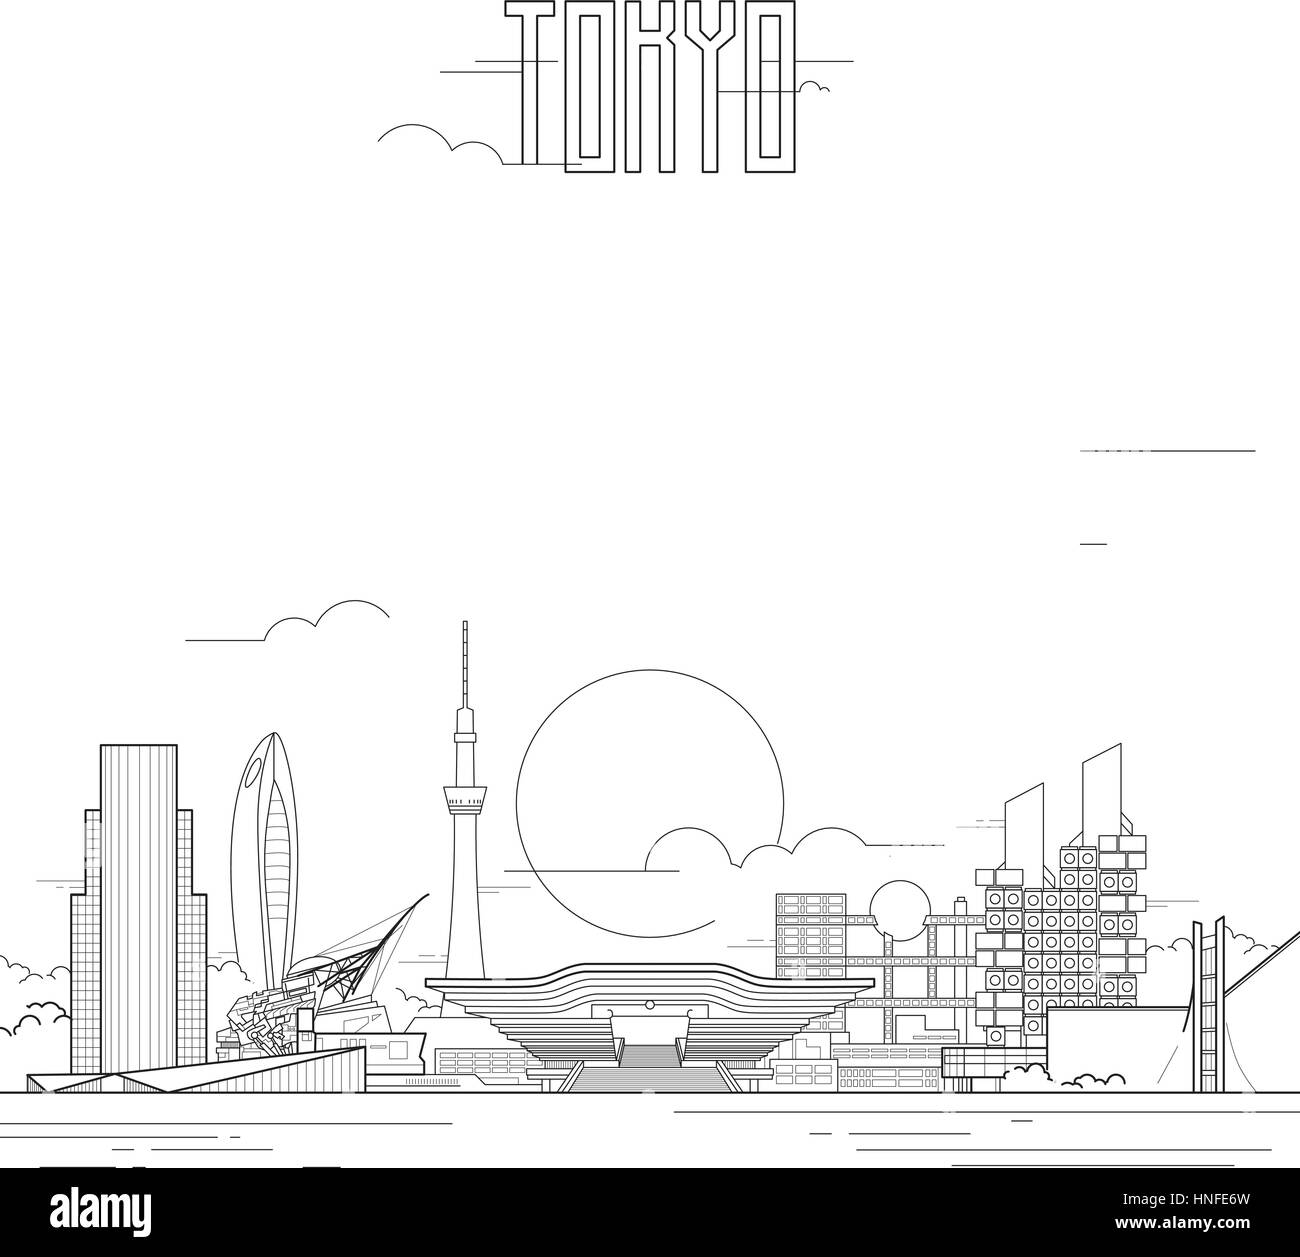 Tokyo city with iconic buildings. Line art flat design. Vector illustration. Stock Vector